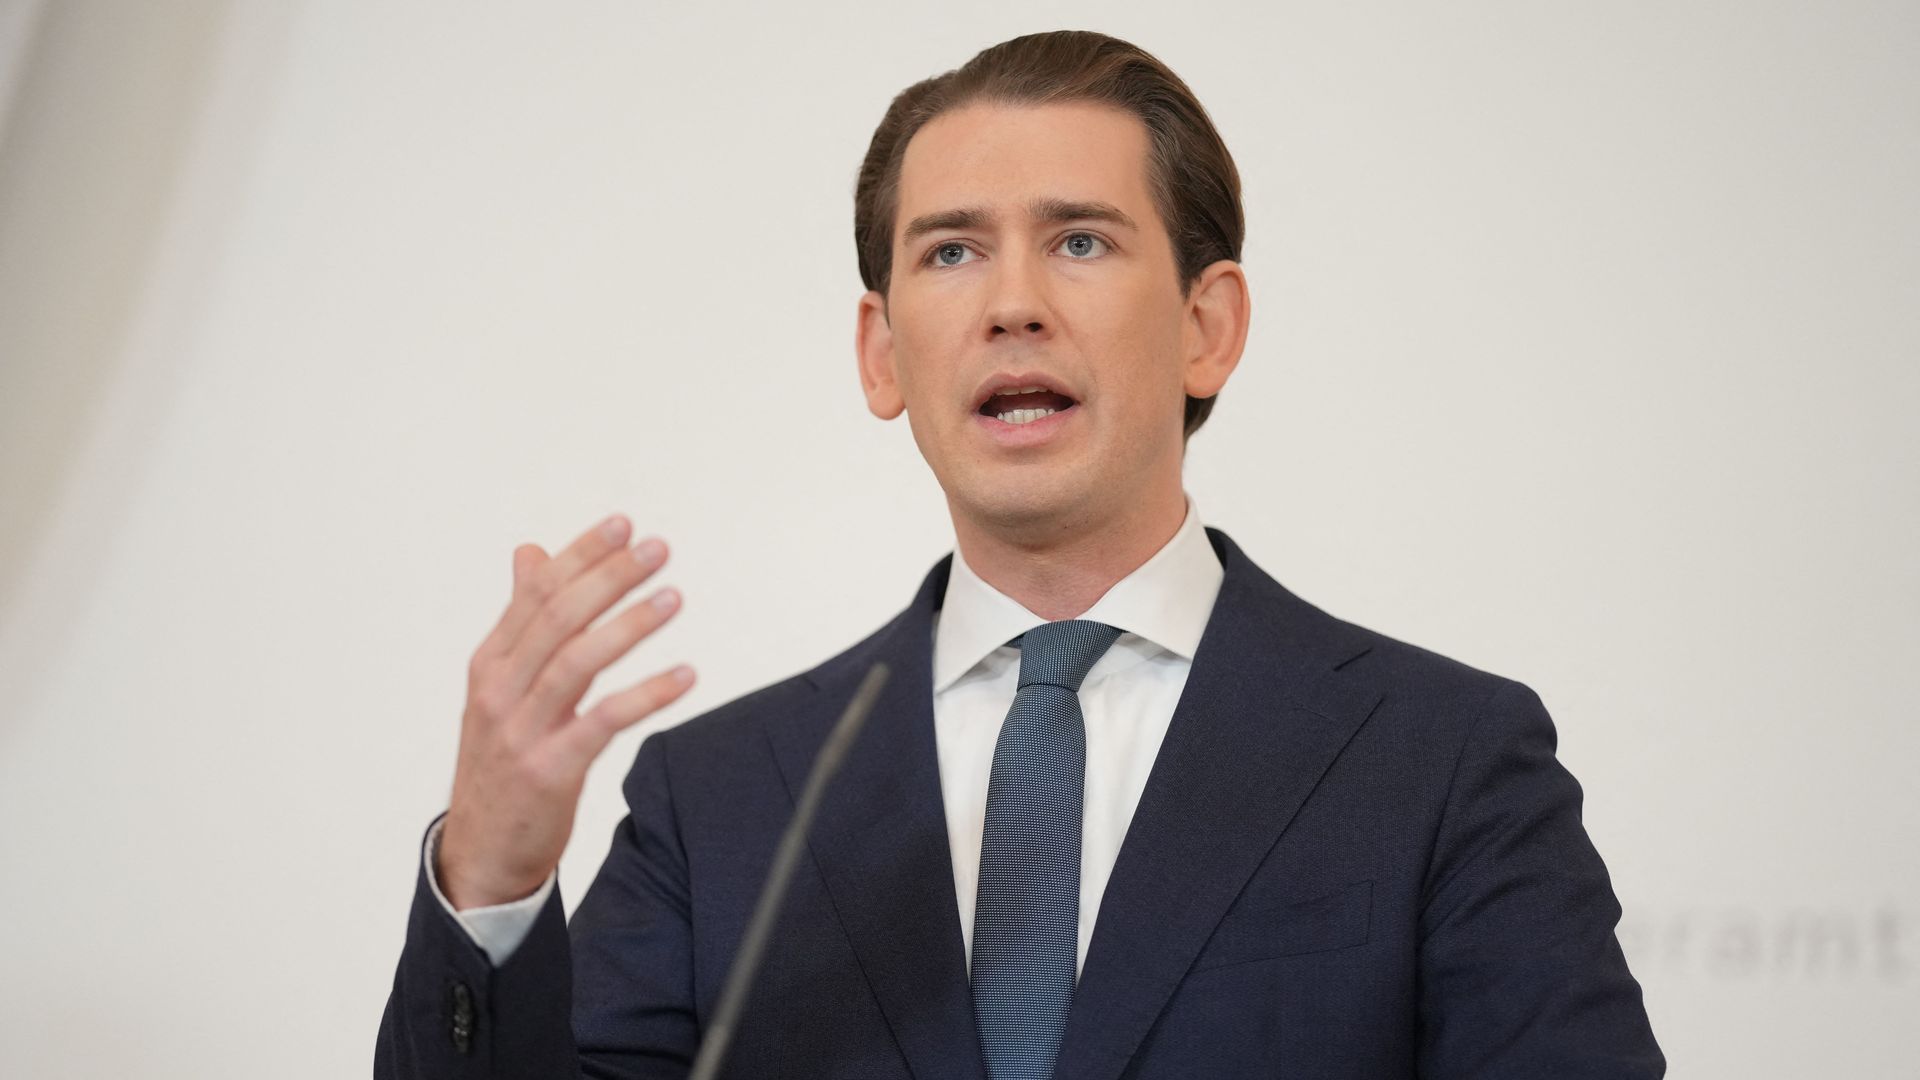 Austrian Chancellor Sebastian Kurz gives a press statement on the government crisis at the Federal Chancellery in Vienna, Austria, on October 9, 2021.